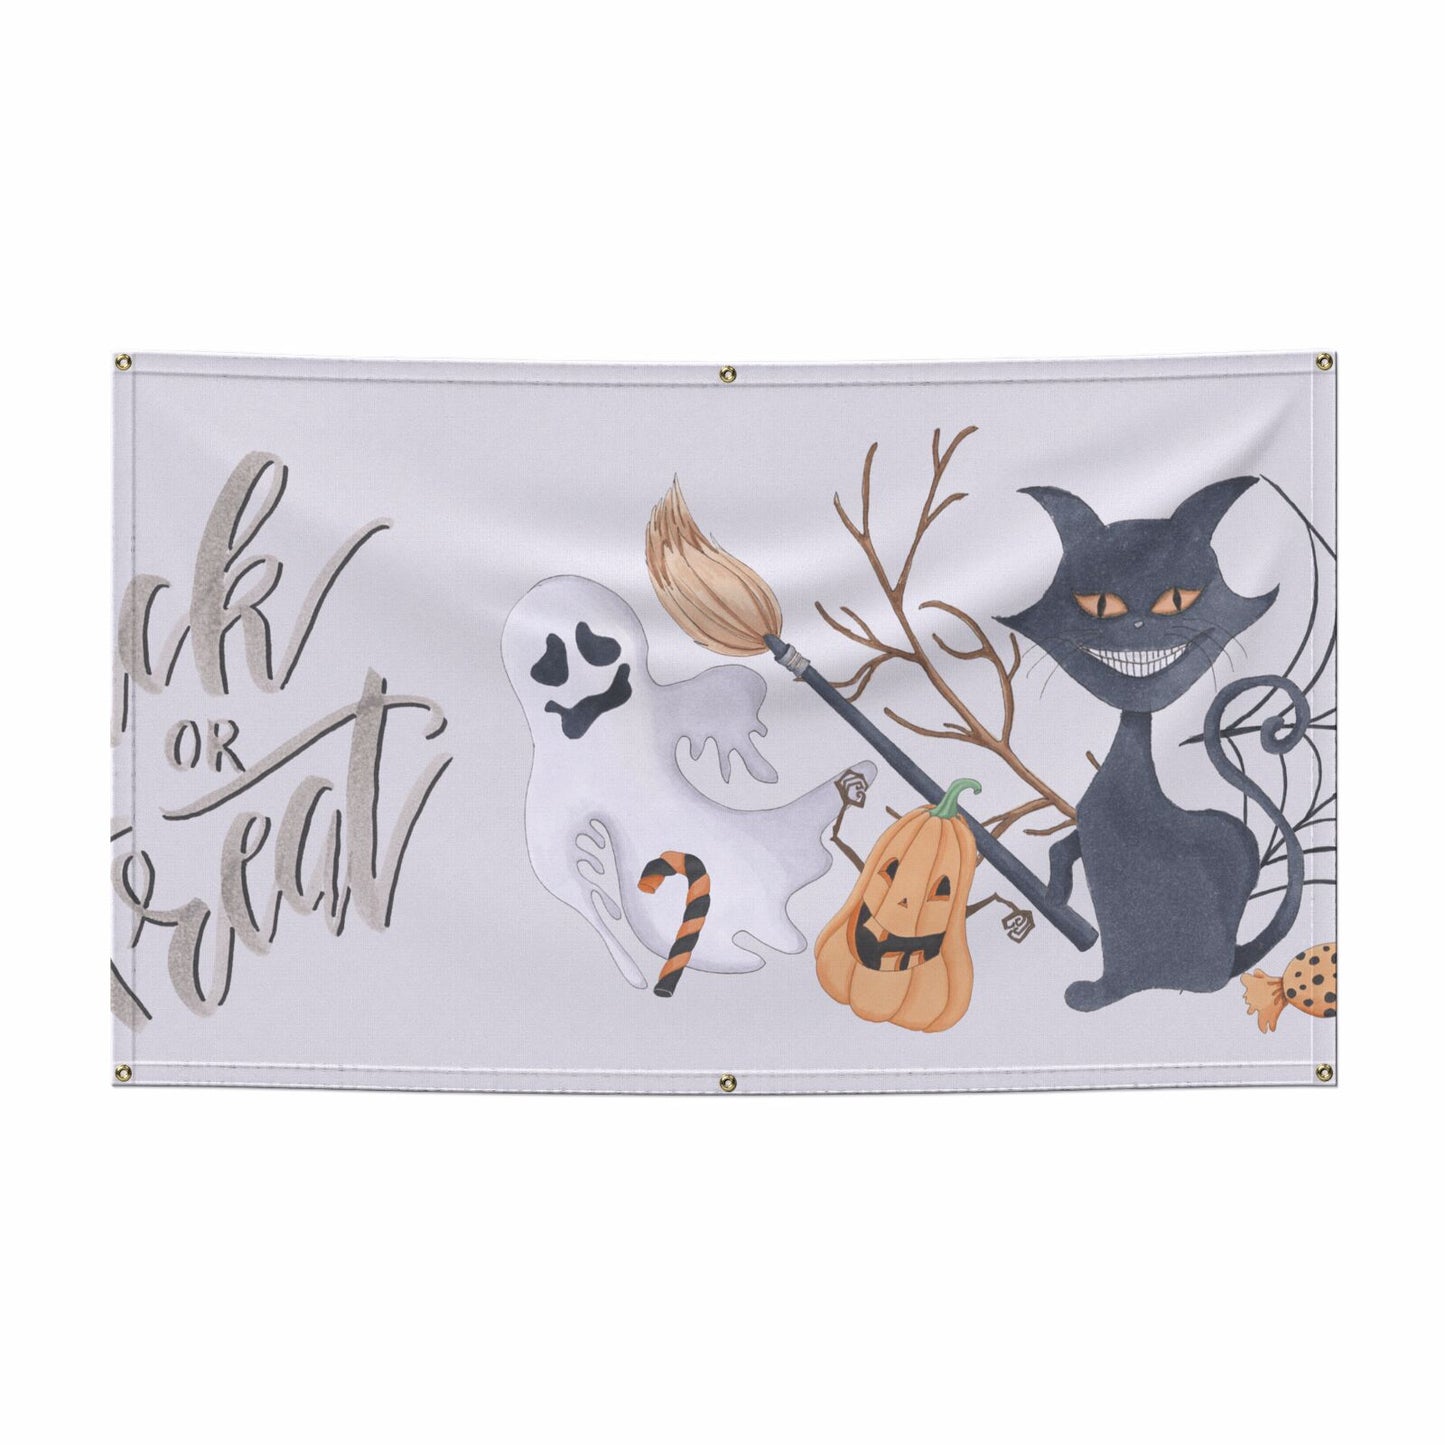 Grinning Cat Halloween 5x3 Vinly Banner with Grommets